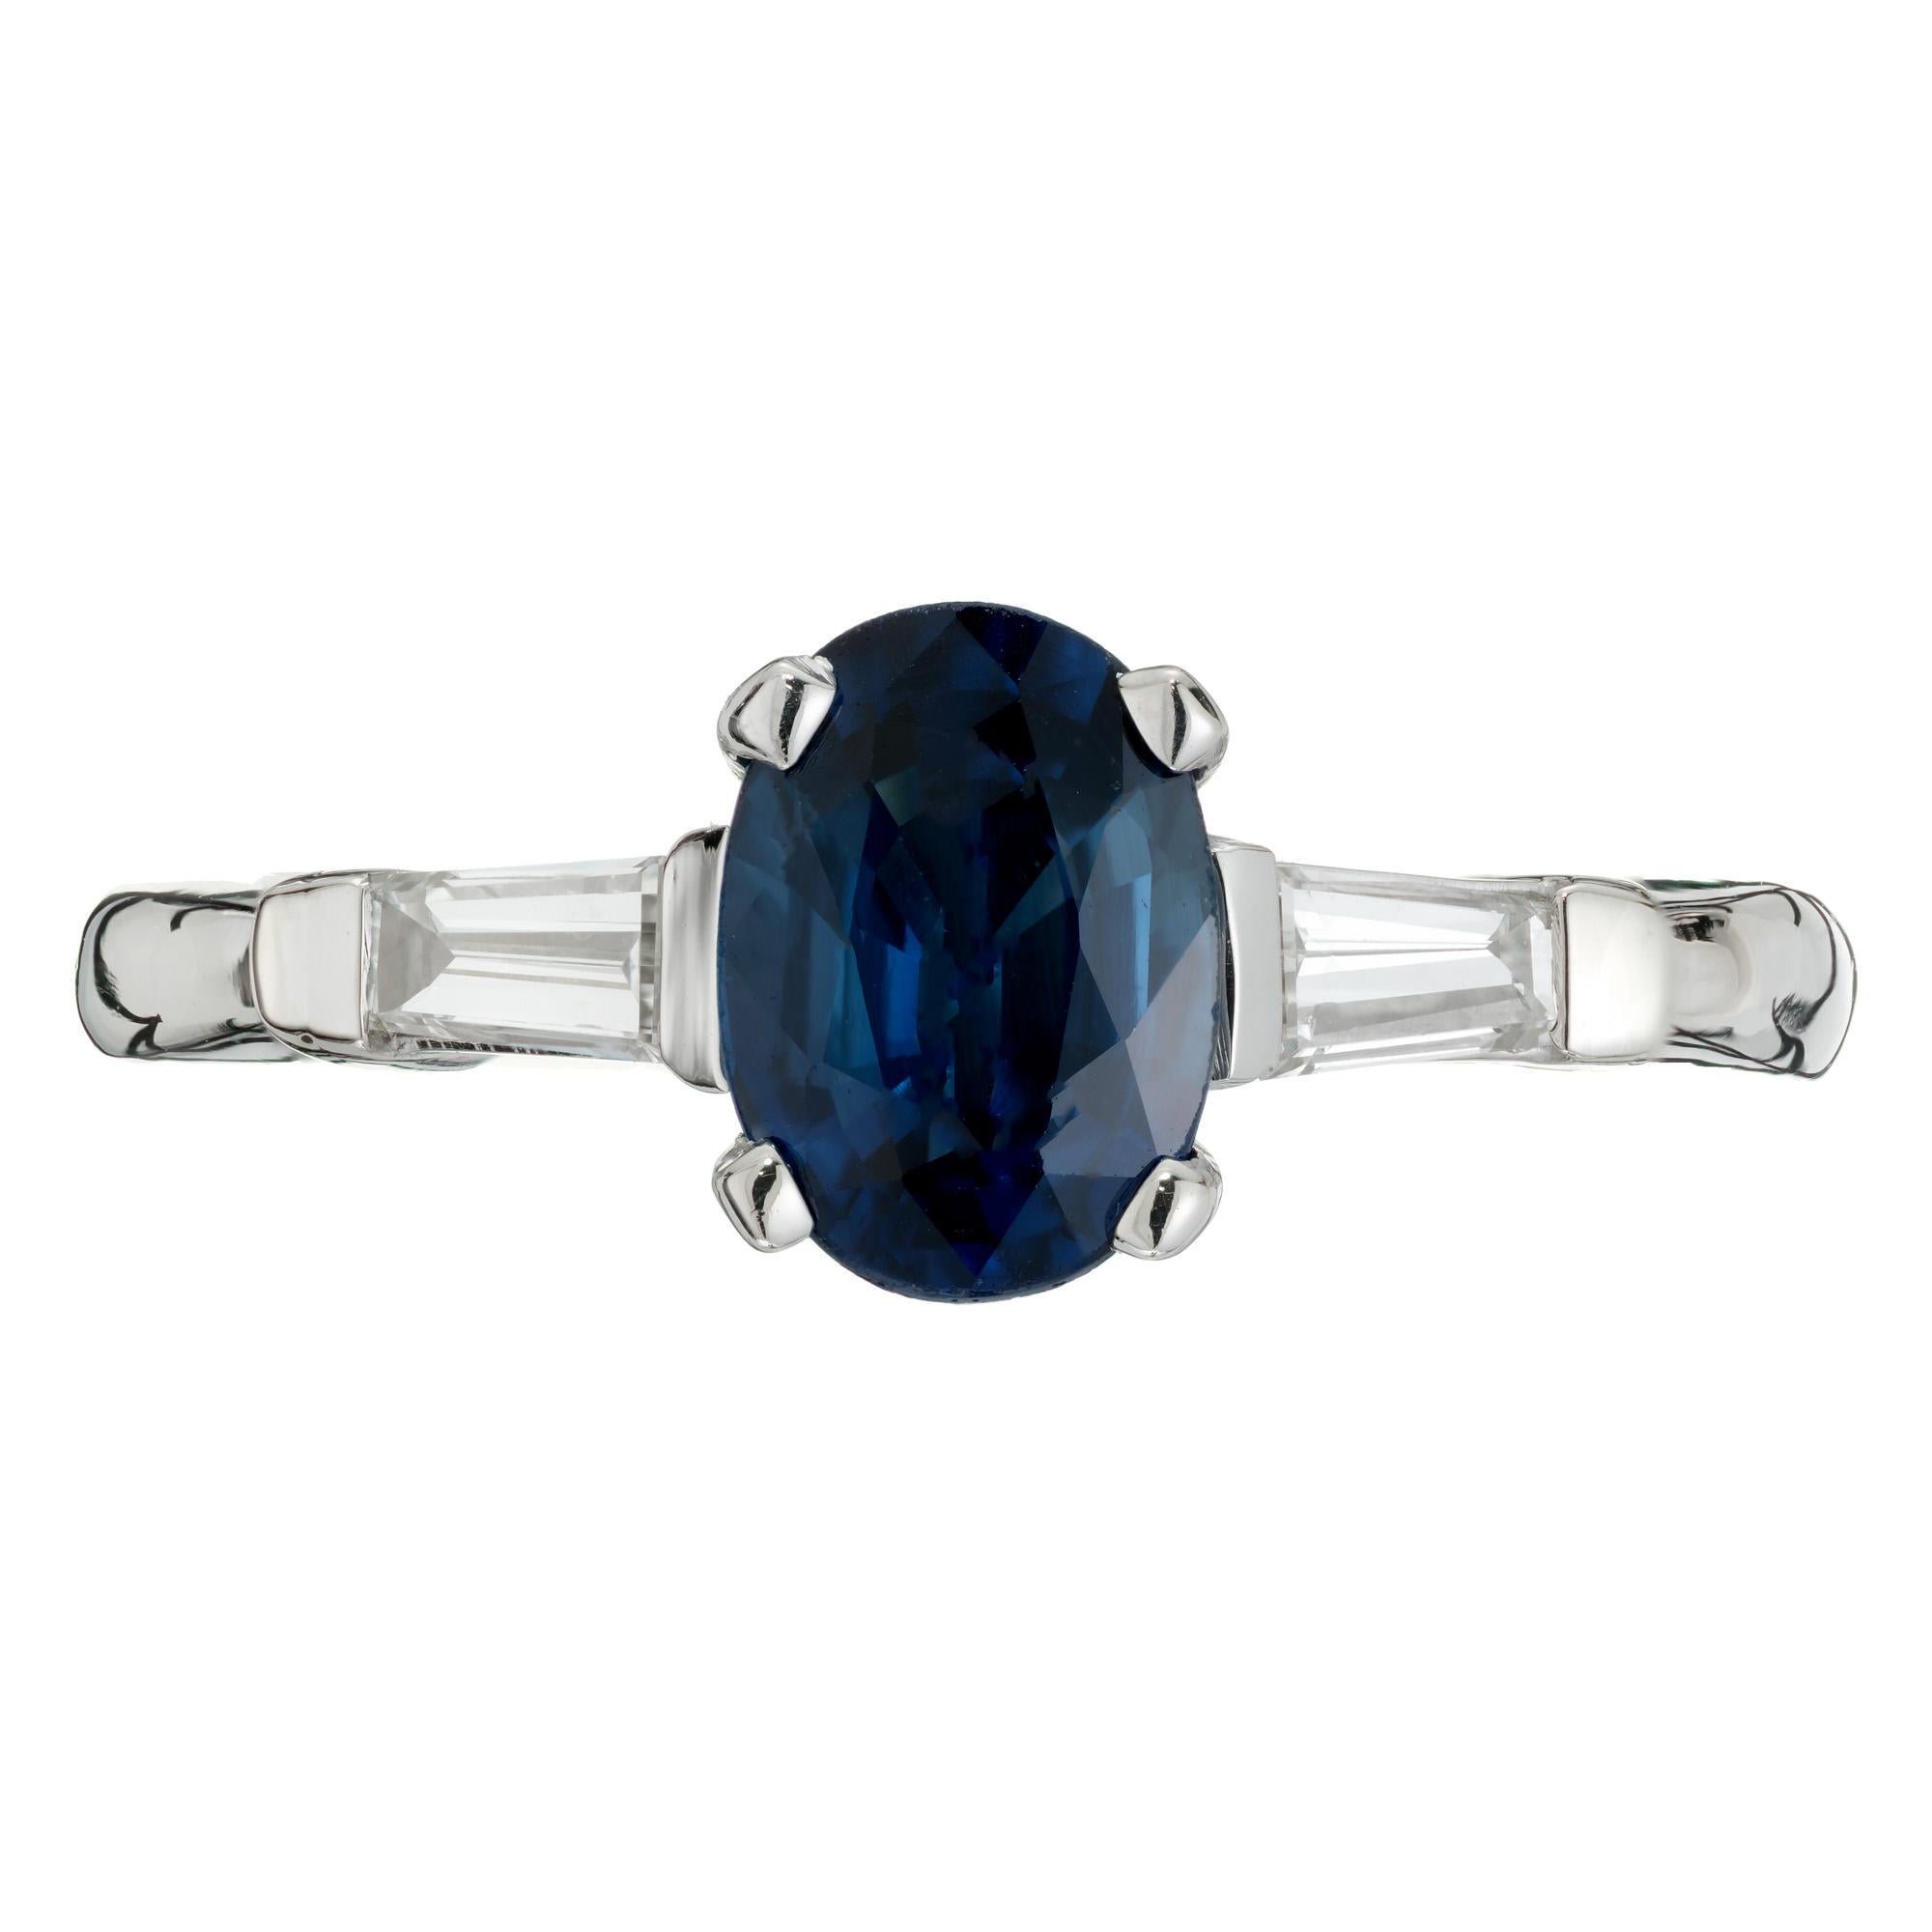 Sapphire and diamond three-stone engagement ring. GIA certified natural, no heat oval sapphire center stone with 2 tapered baguette side diamonds. Set in a 14k white gold setting. Designed and crafted in the Peter Suchy workshop

1 oval blue